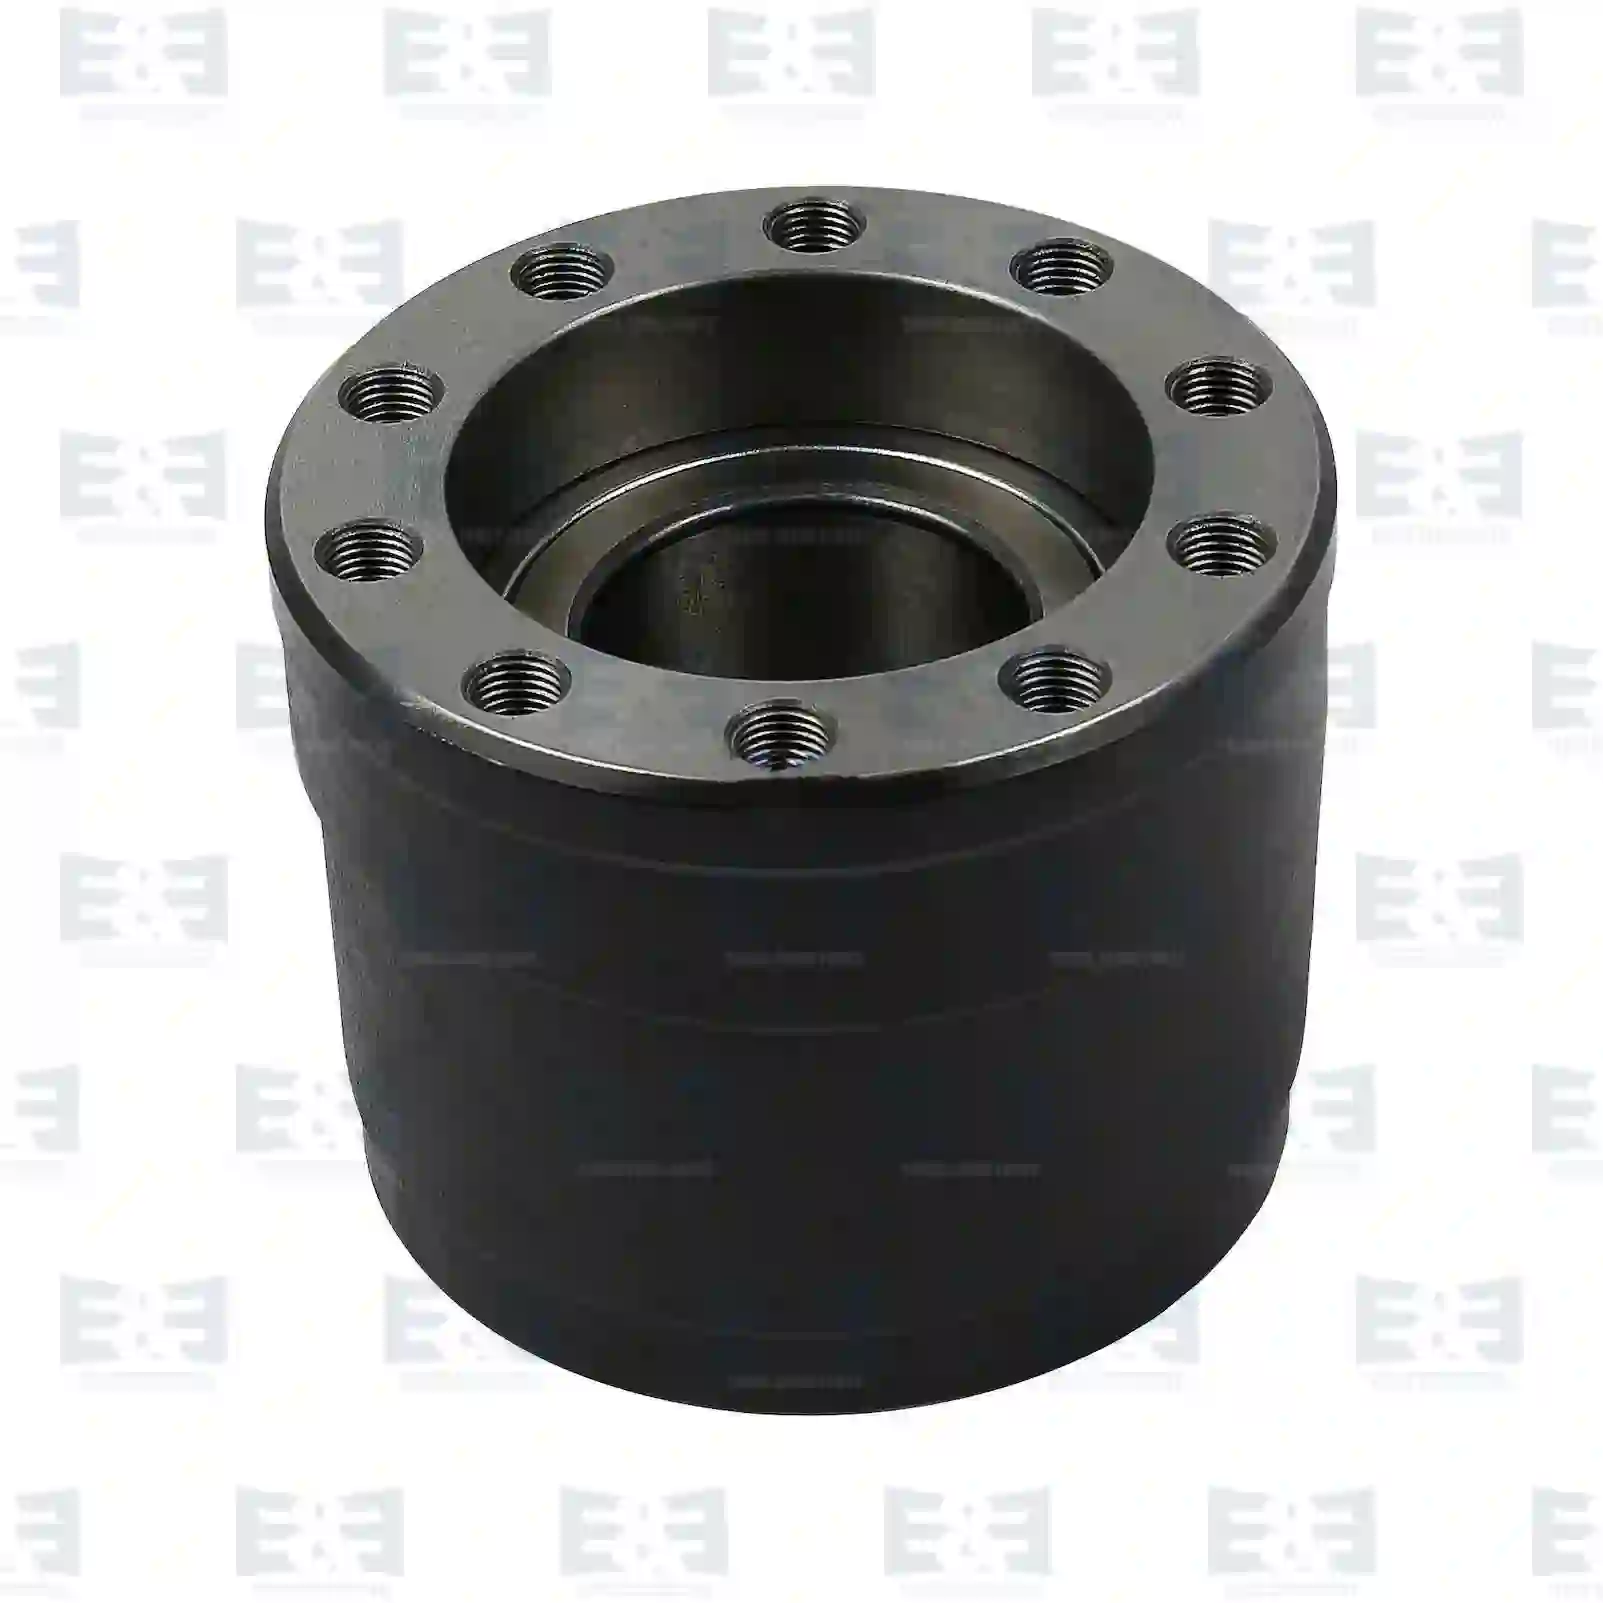 Wheel hub, with bearing, without ABS ring, 2E2284750, 9723300125, 9723300225, 9723300325, 9723300425, 9723300525, 9723300625, ZG30217-0008 ||  2E2284750 E&E Truck Spare Parts | Truck Spare Parts, Auotomotive Spare Parts Wheel hub, with bearing, without ABS ring, 2E2284750, 9723300125, 9723300225, 9723300325, 9723300425, 9723300525, 9723300625, ZG30217-0008 ||  2E2284750 E&E Truck Spare Parts | Truck Spare Parts, Auotomotive Spare Parts